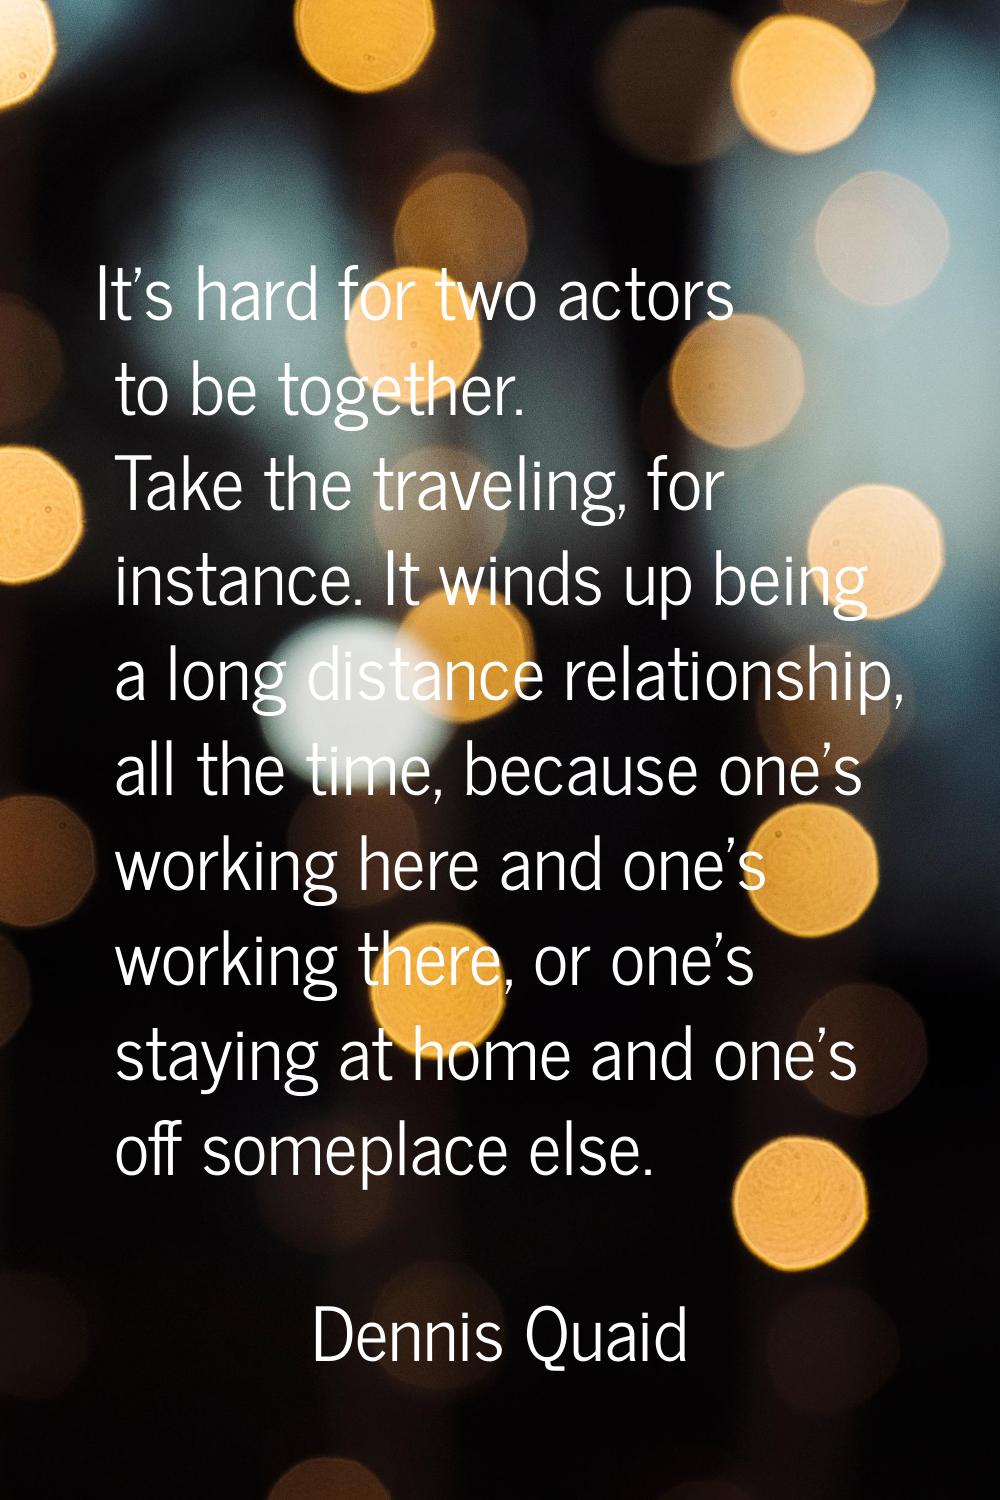 It's hard for two actors to be together. Take the traveling, for instance. It winds up being a long